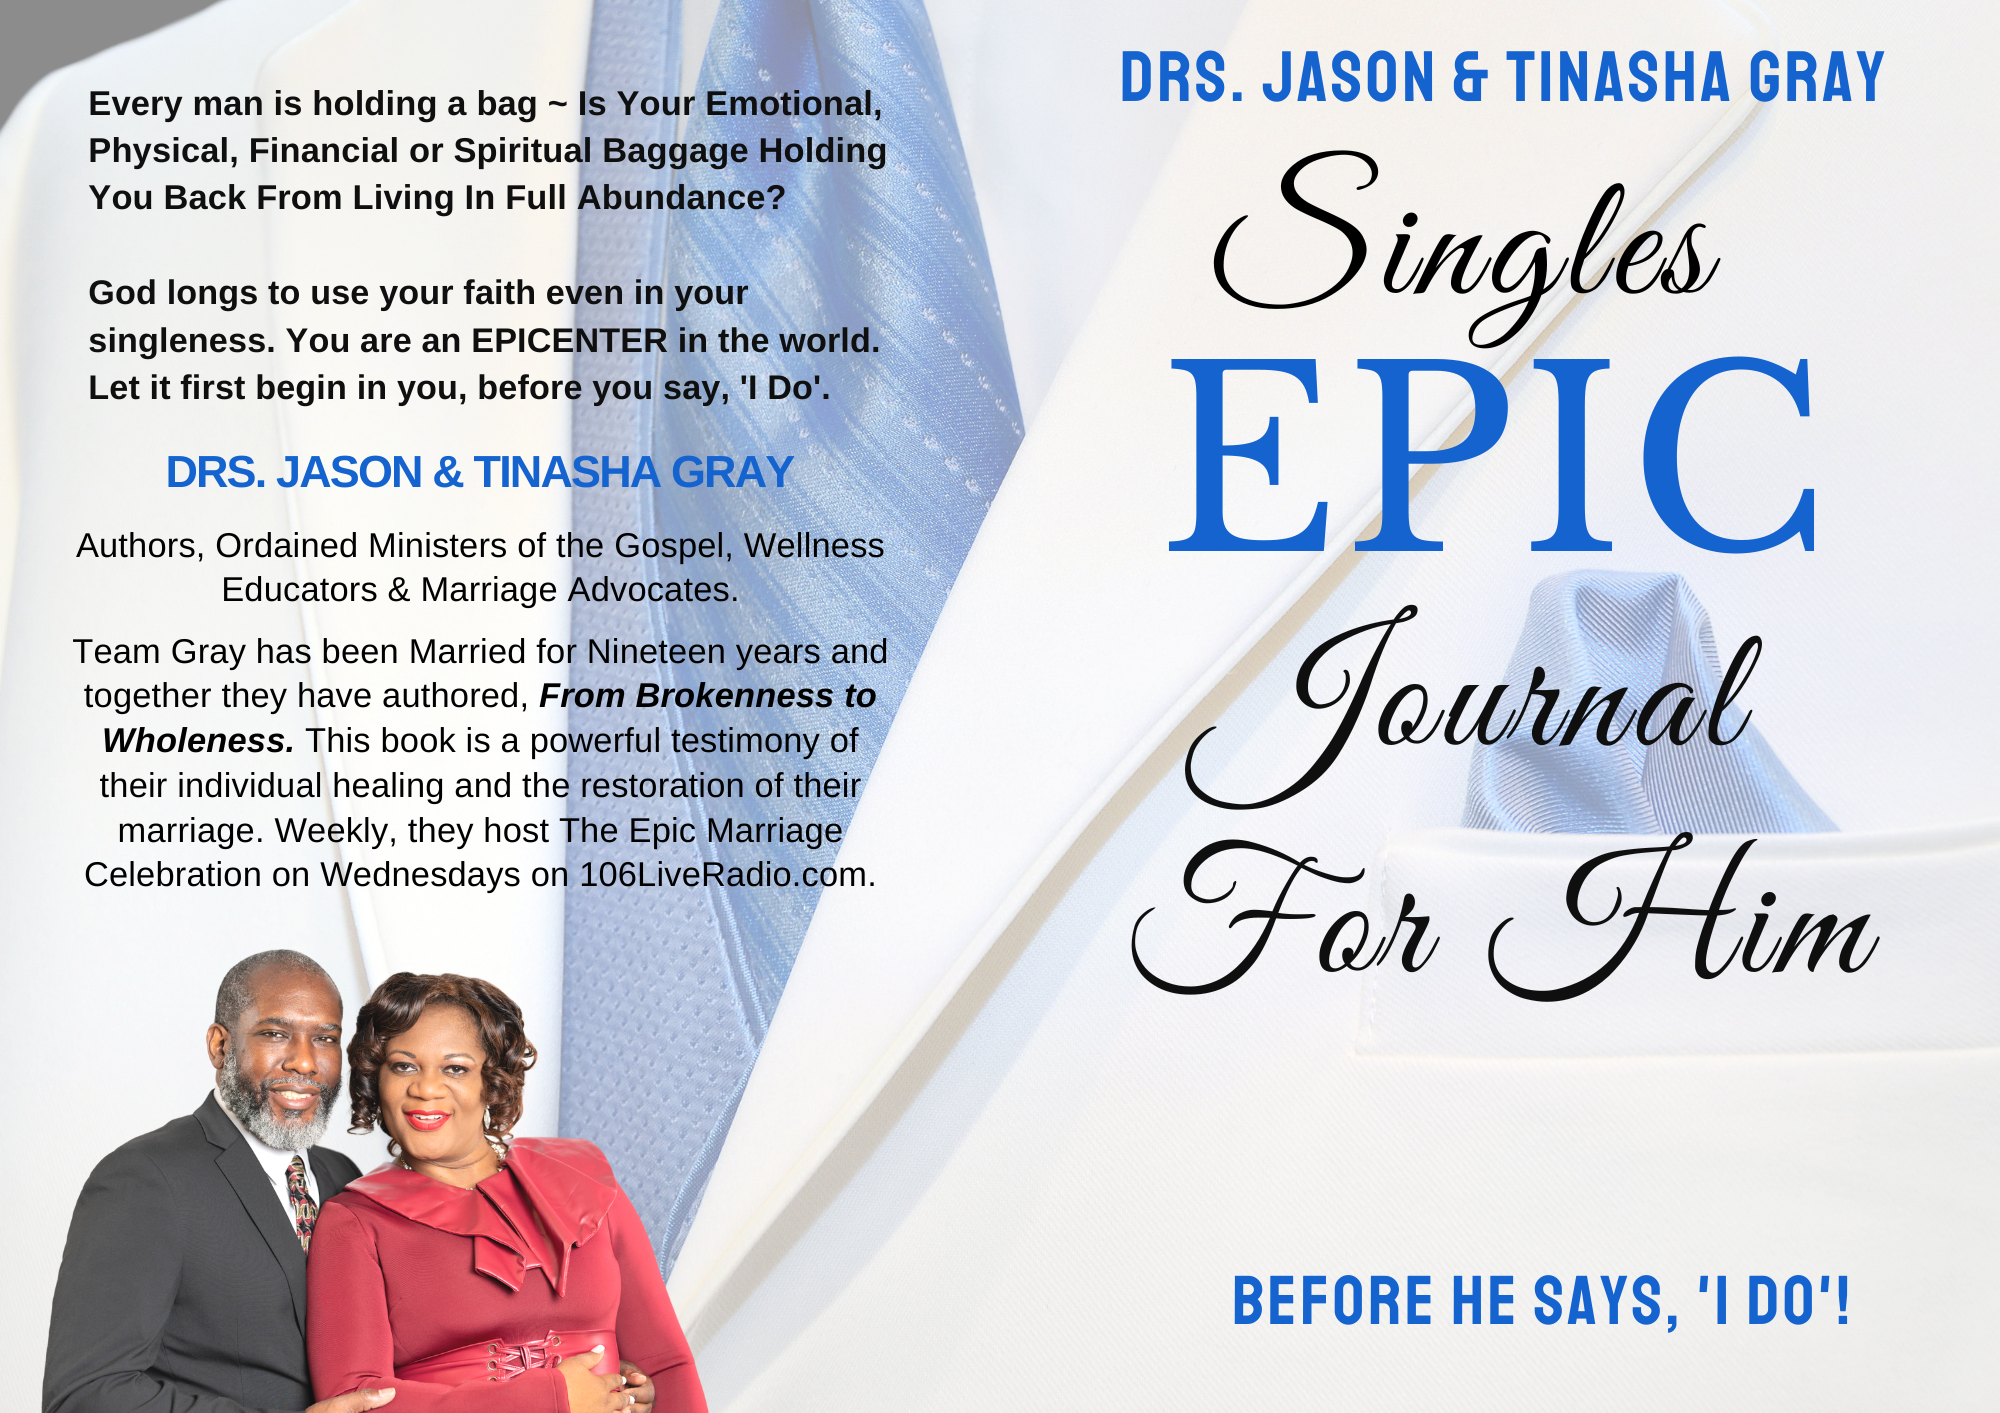 Singles EPIC Journal For Him: Before He Says, I Do!